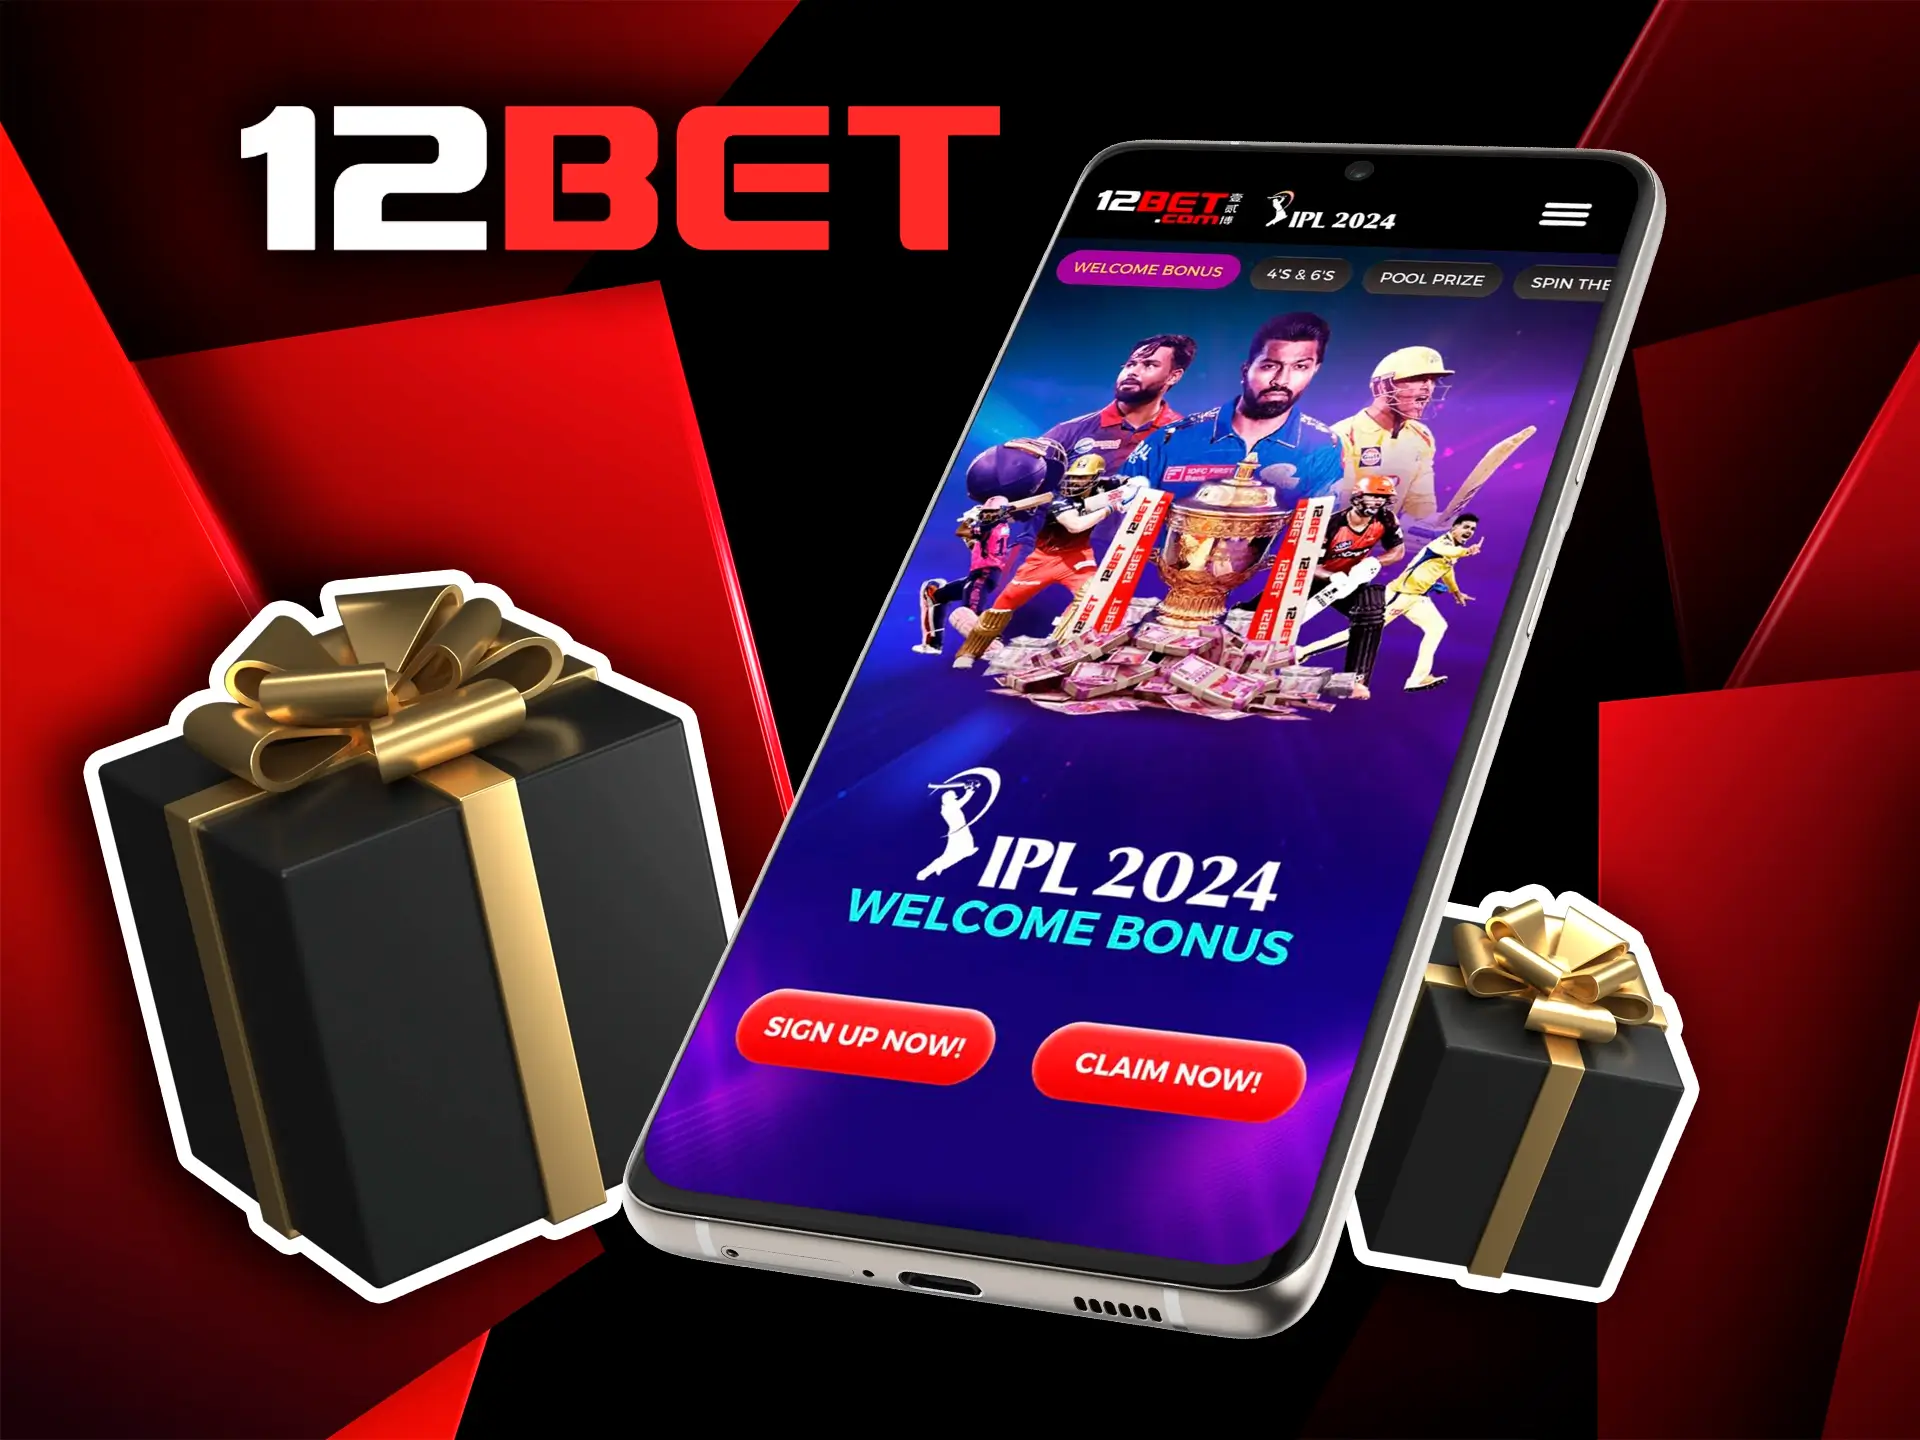 Use 12Bet's cricket betting bonuses to win more and additionally get cashback.